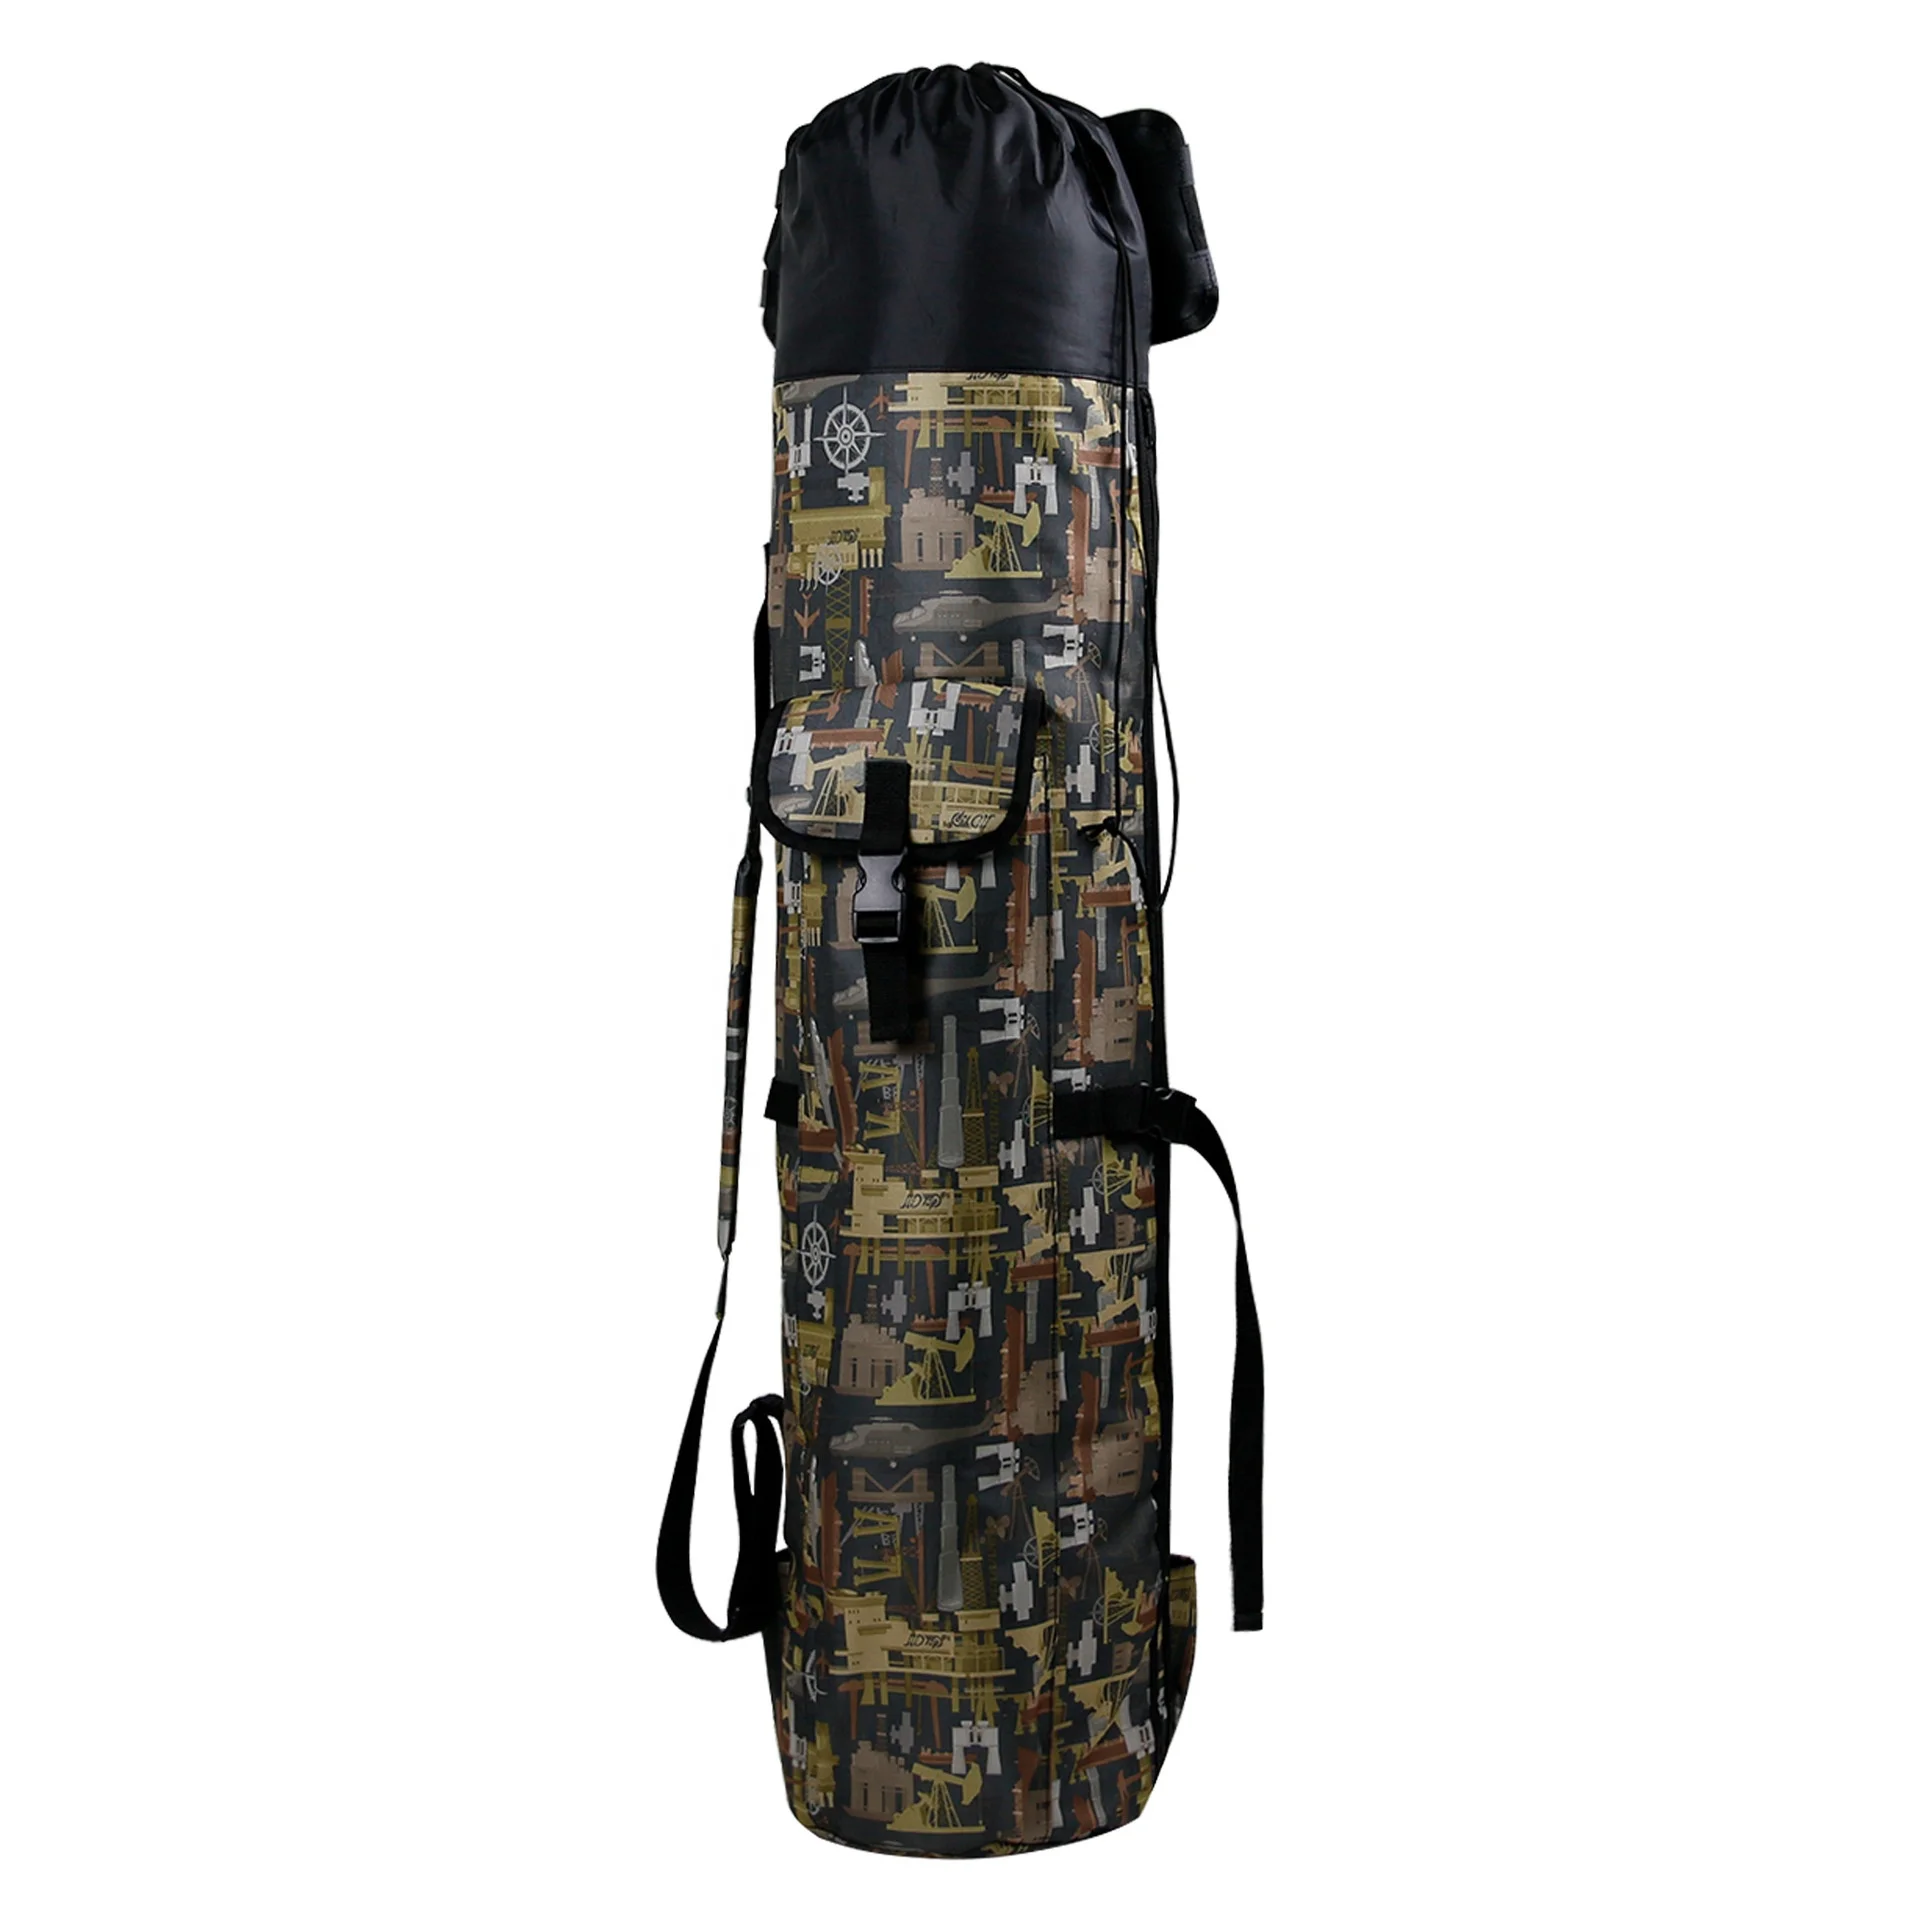 Fishing bag 70L large capacity multi-function camo fishing tackle rod organizer bag fishing tackle bag for 5pcs pole and reels